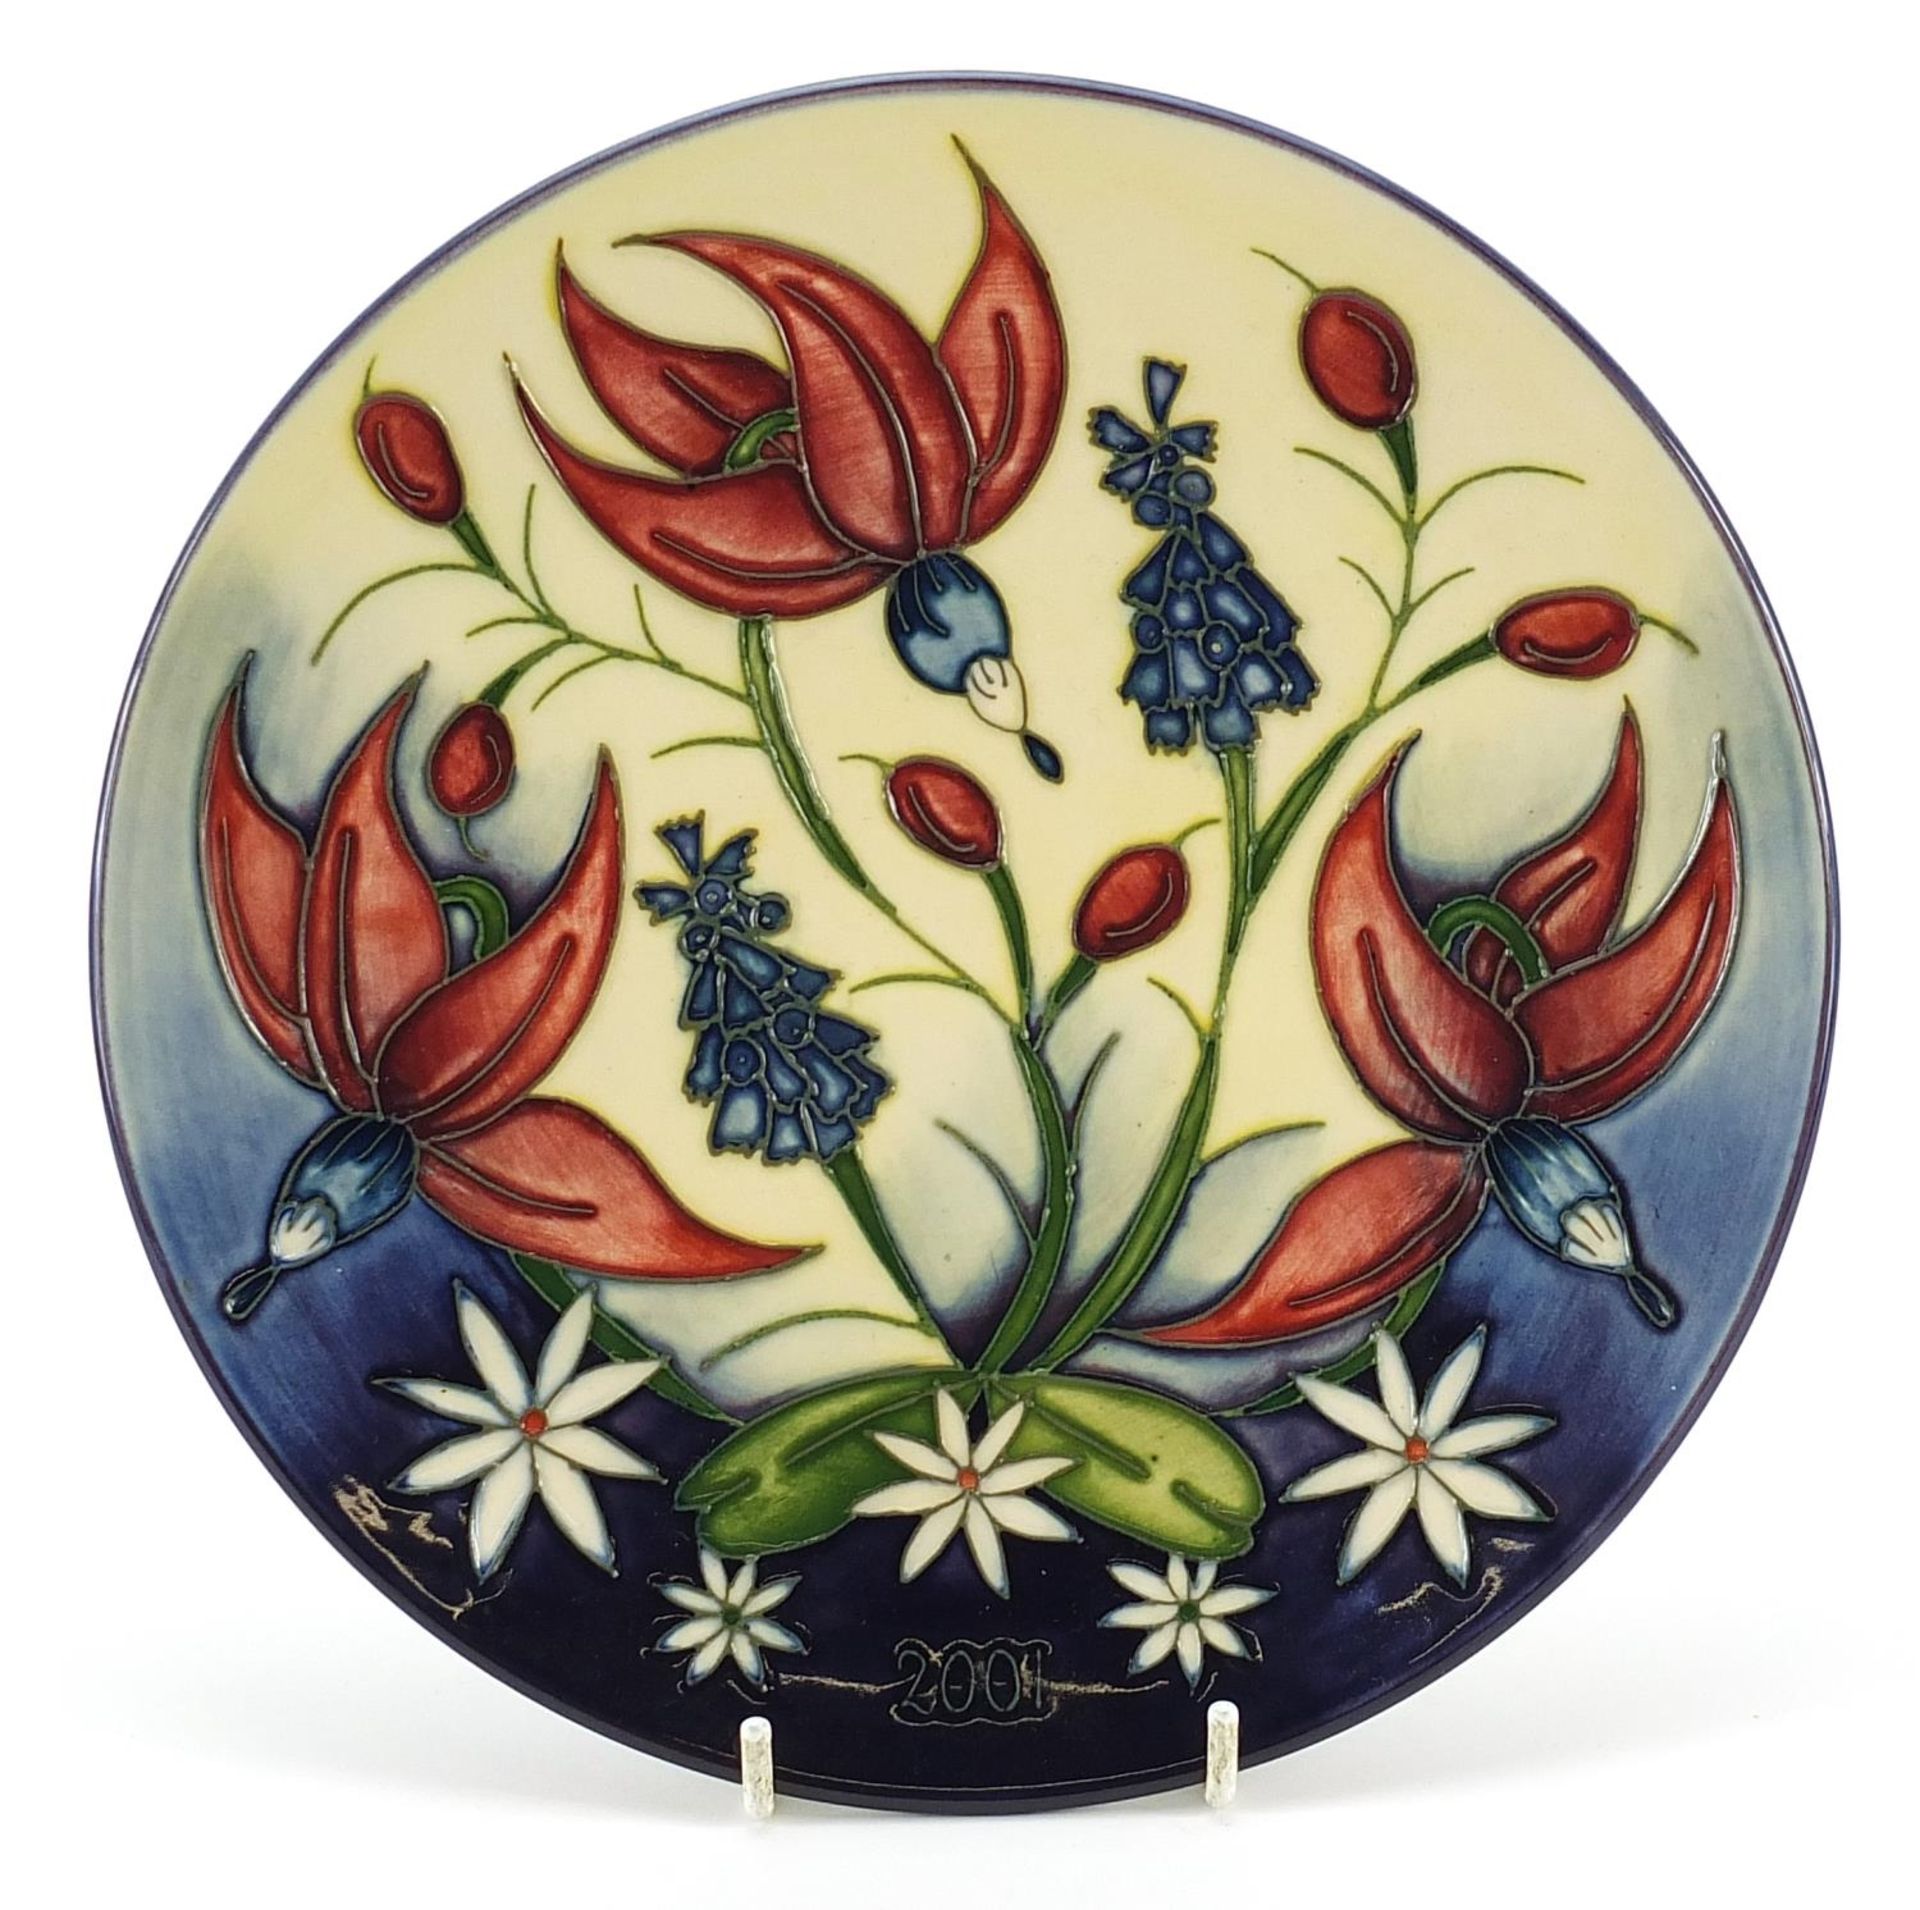 Moorcroft Pottery 2001 year plate by Emma Bossons, limited edition 434/750, 22cm in diameter